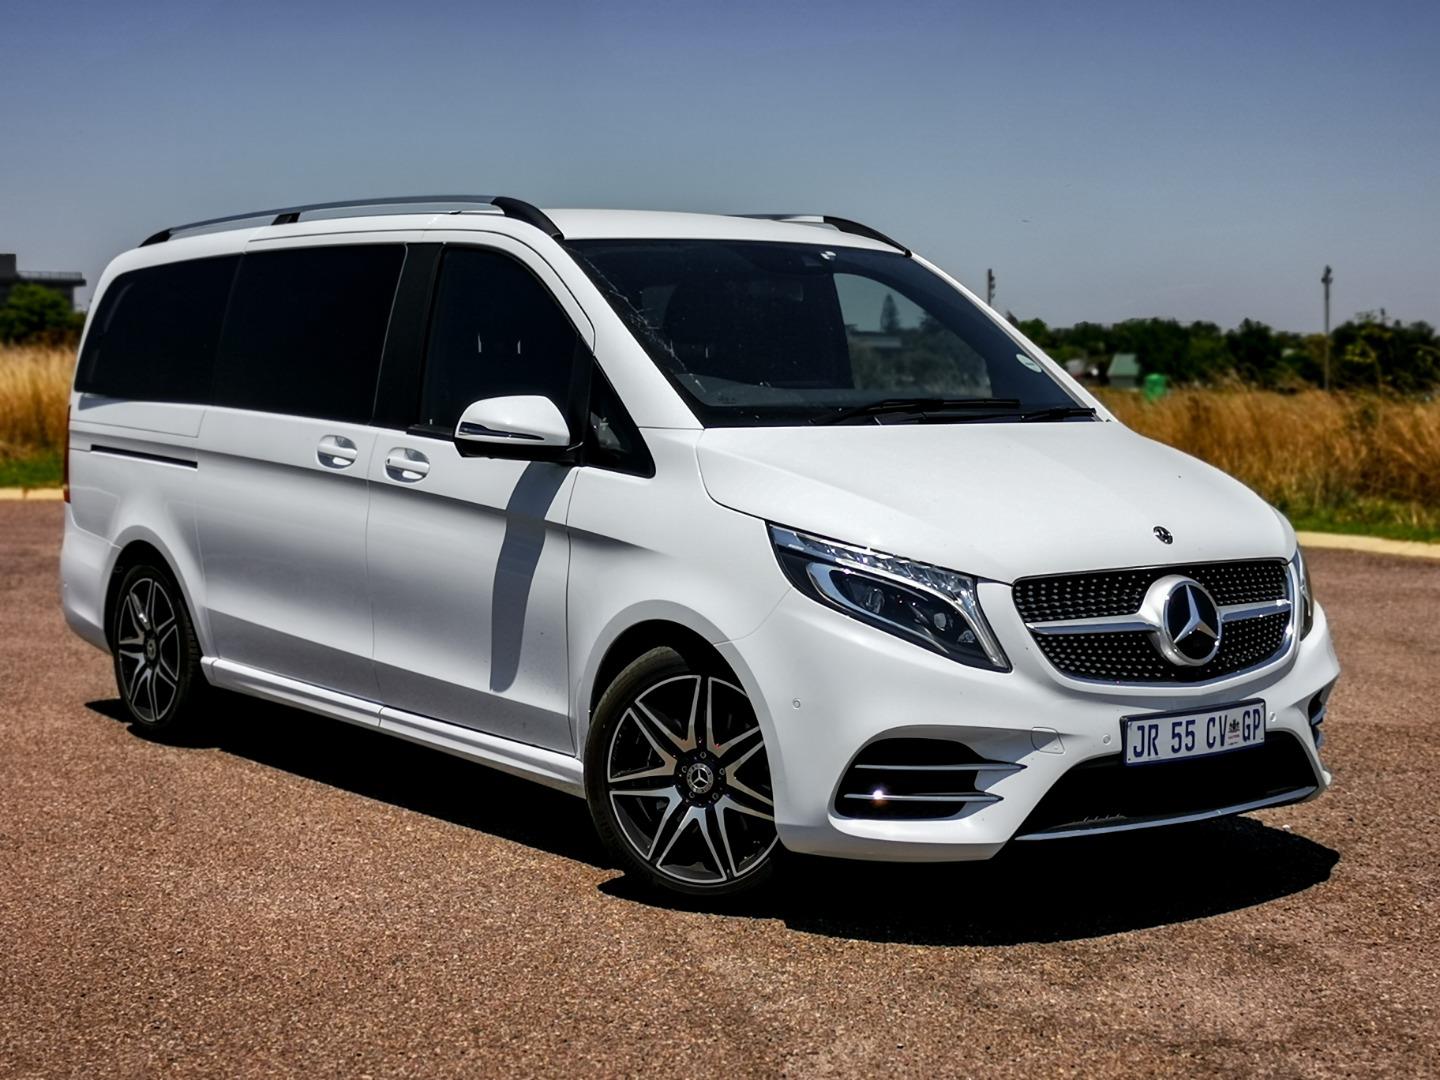 Mercedes-Benz V 300 d (2020) review: The ultimate luxury people-carrier